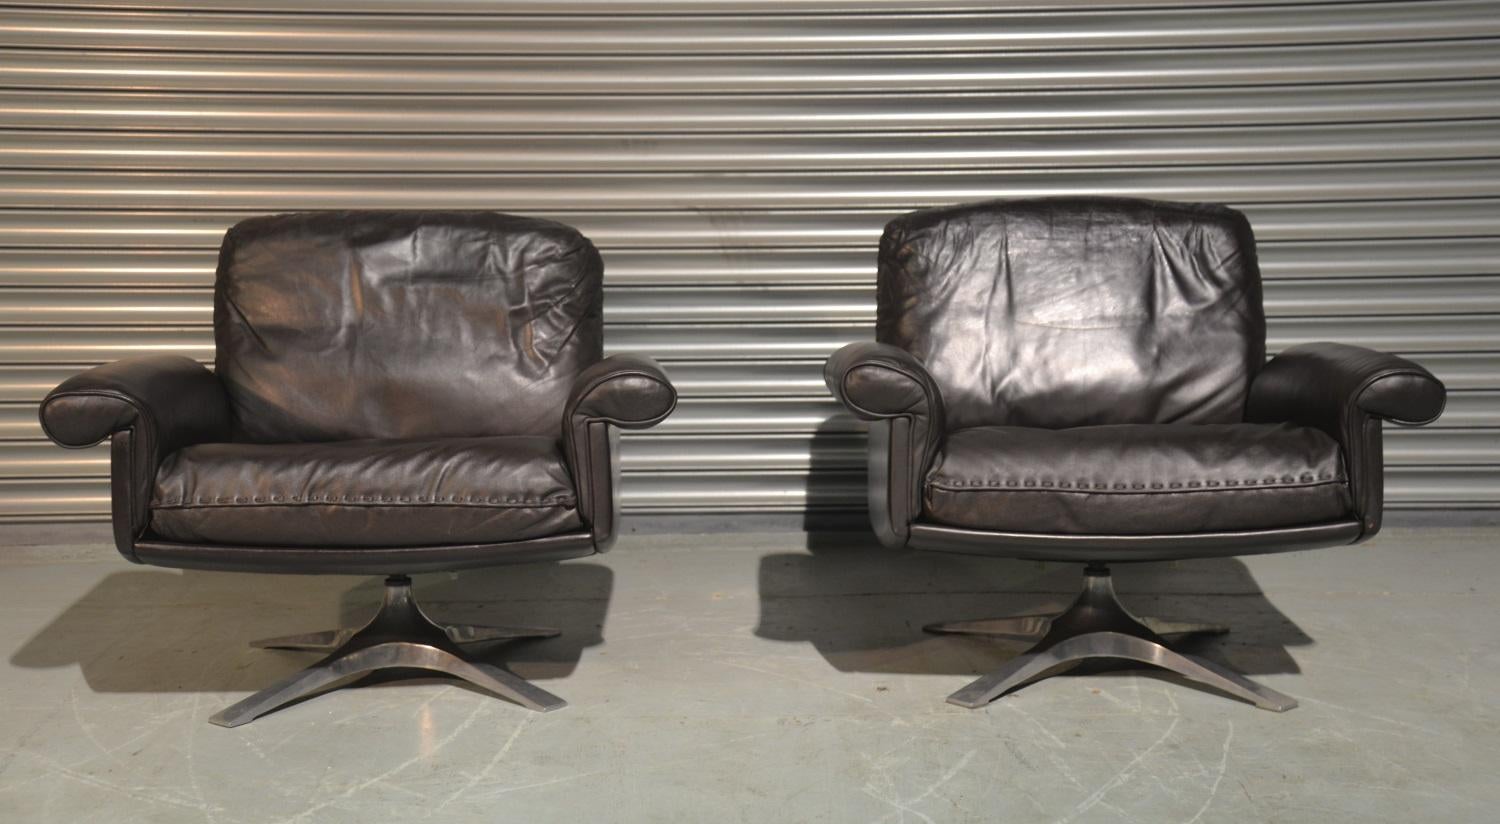 Discounted airfreight for our US and International customers ( from 2 weeks door to door )

We are delighted to bring to you a pair of highly desirable vintage De Sede DS-31 swivel lounge club armchairs in beautiful soft leather with whipstitch edge